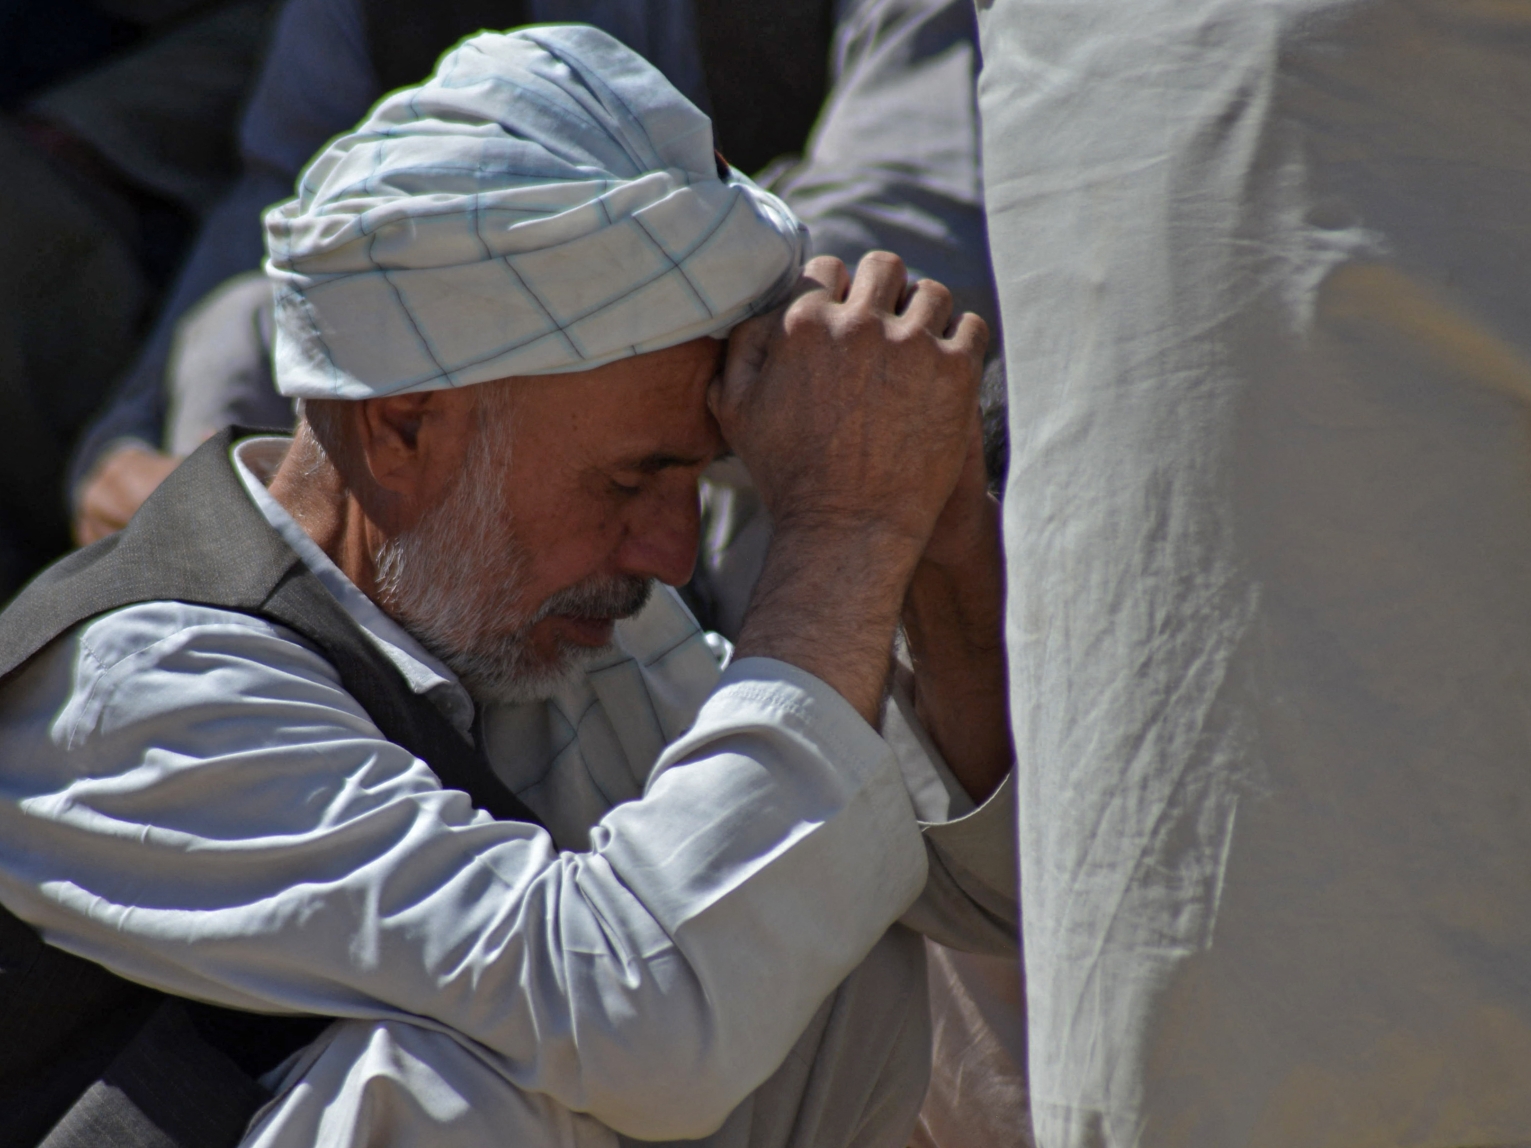 A man mourns the death of his relative at a graveyard in Kandahar on October 16, 2021.